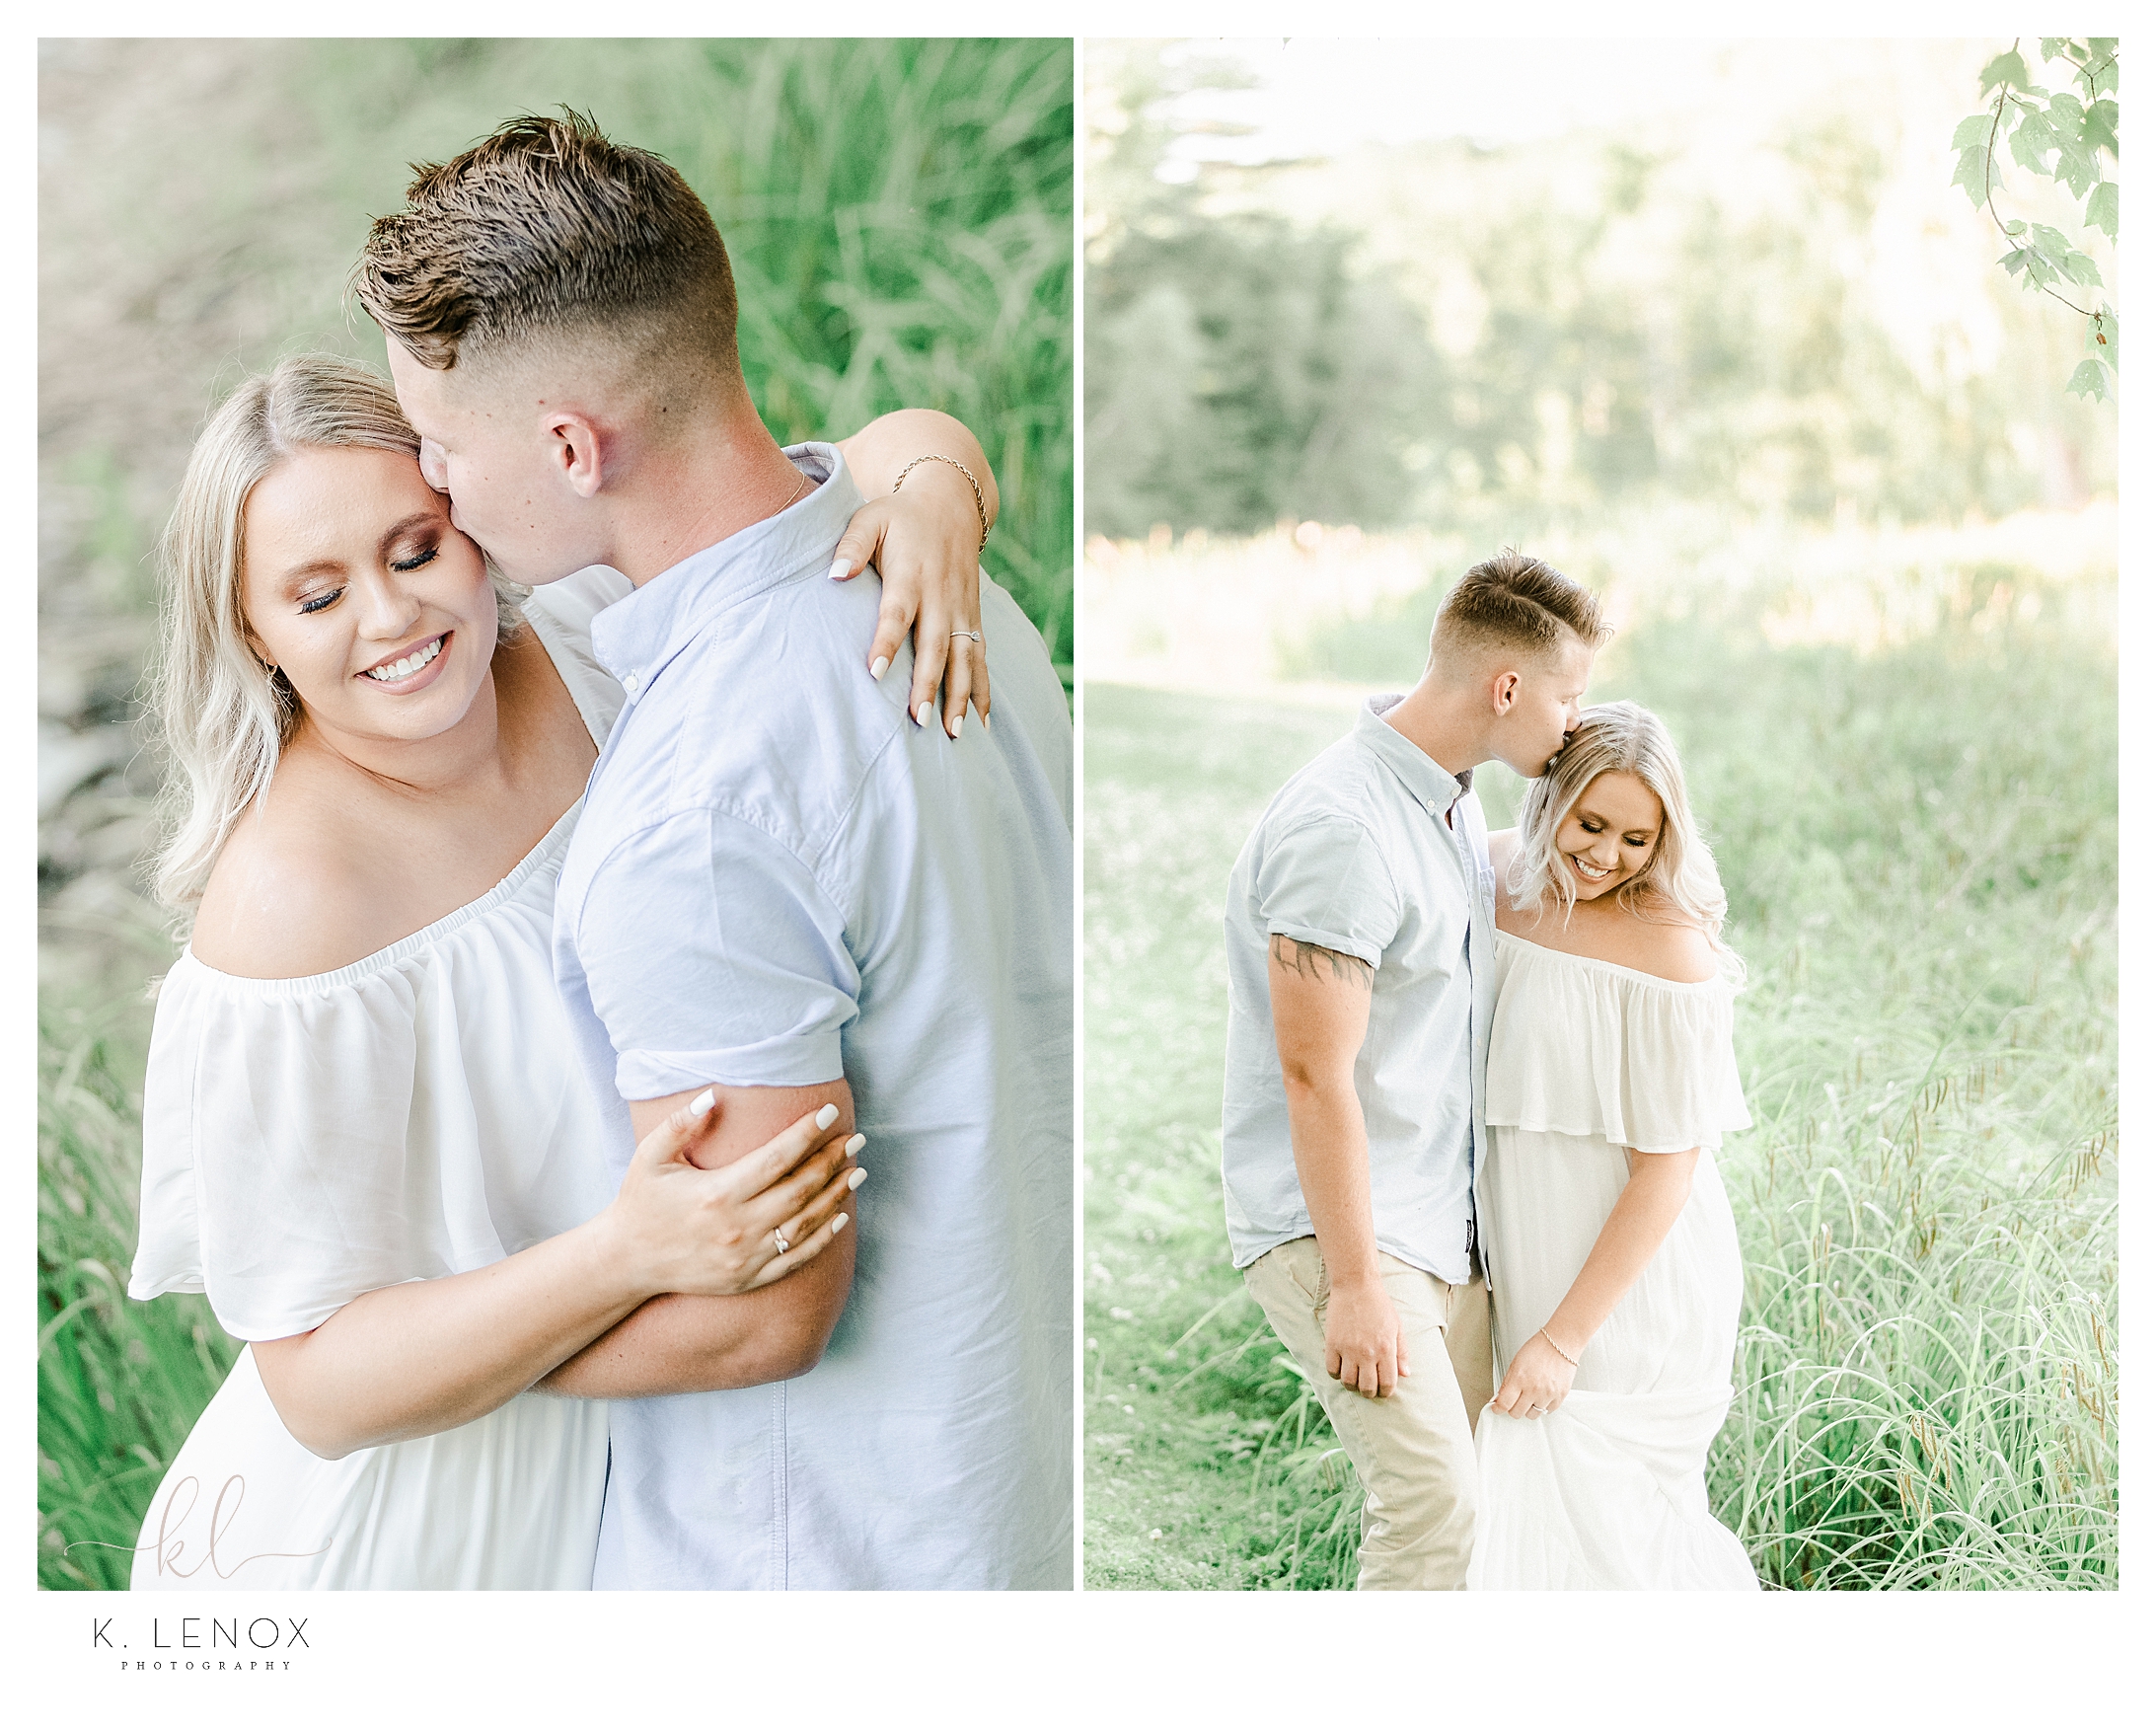 New England Wedding Photographer shoots a light and airy engagement photos at Alyson's Orchard